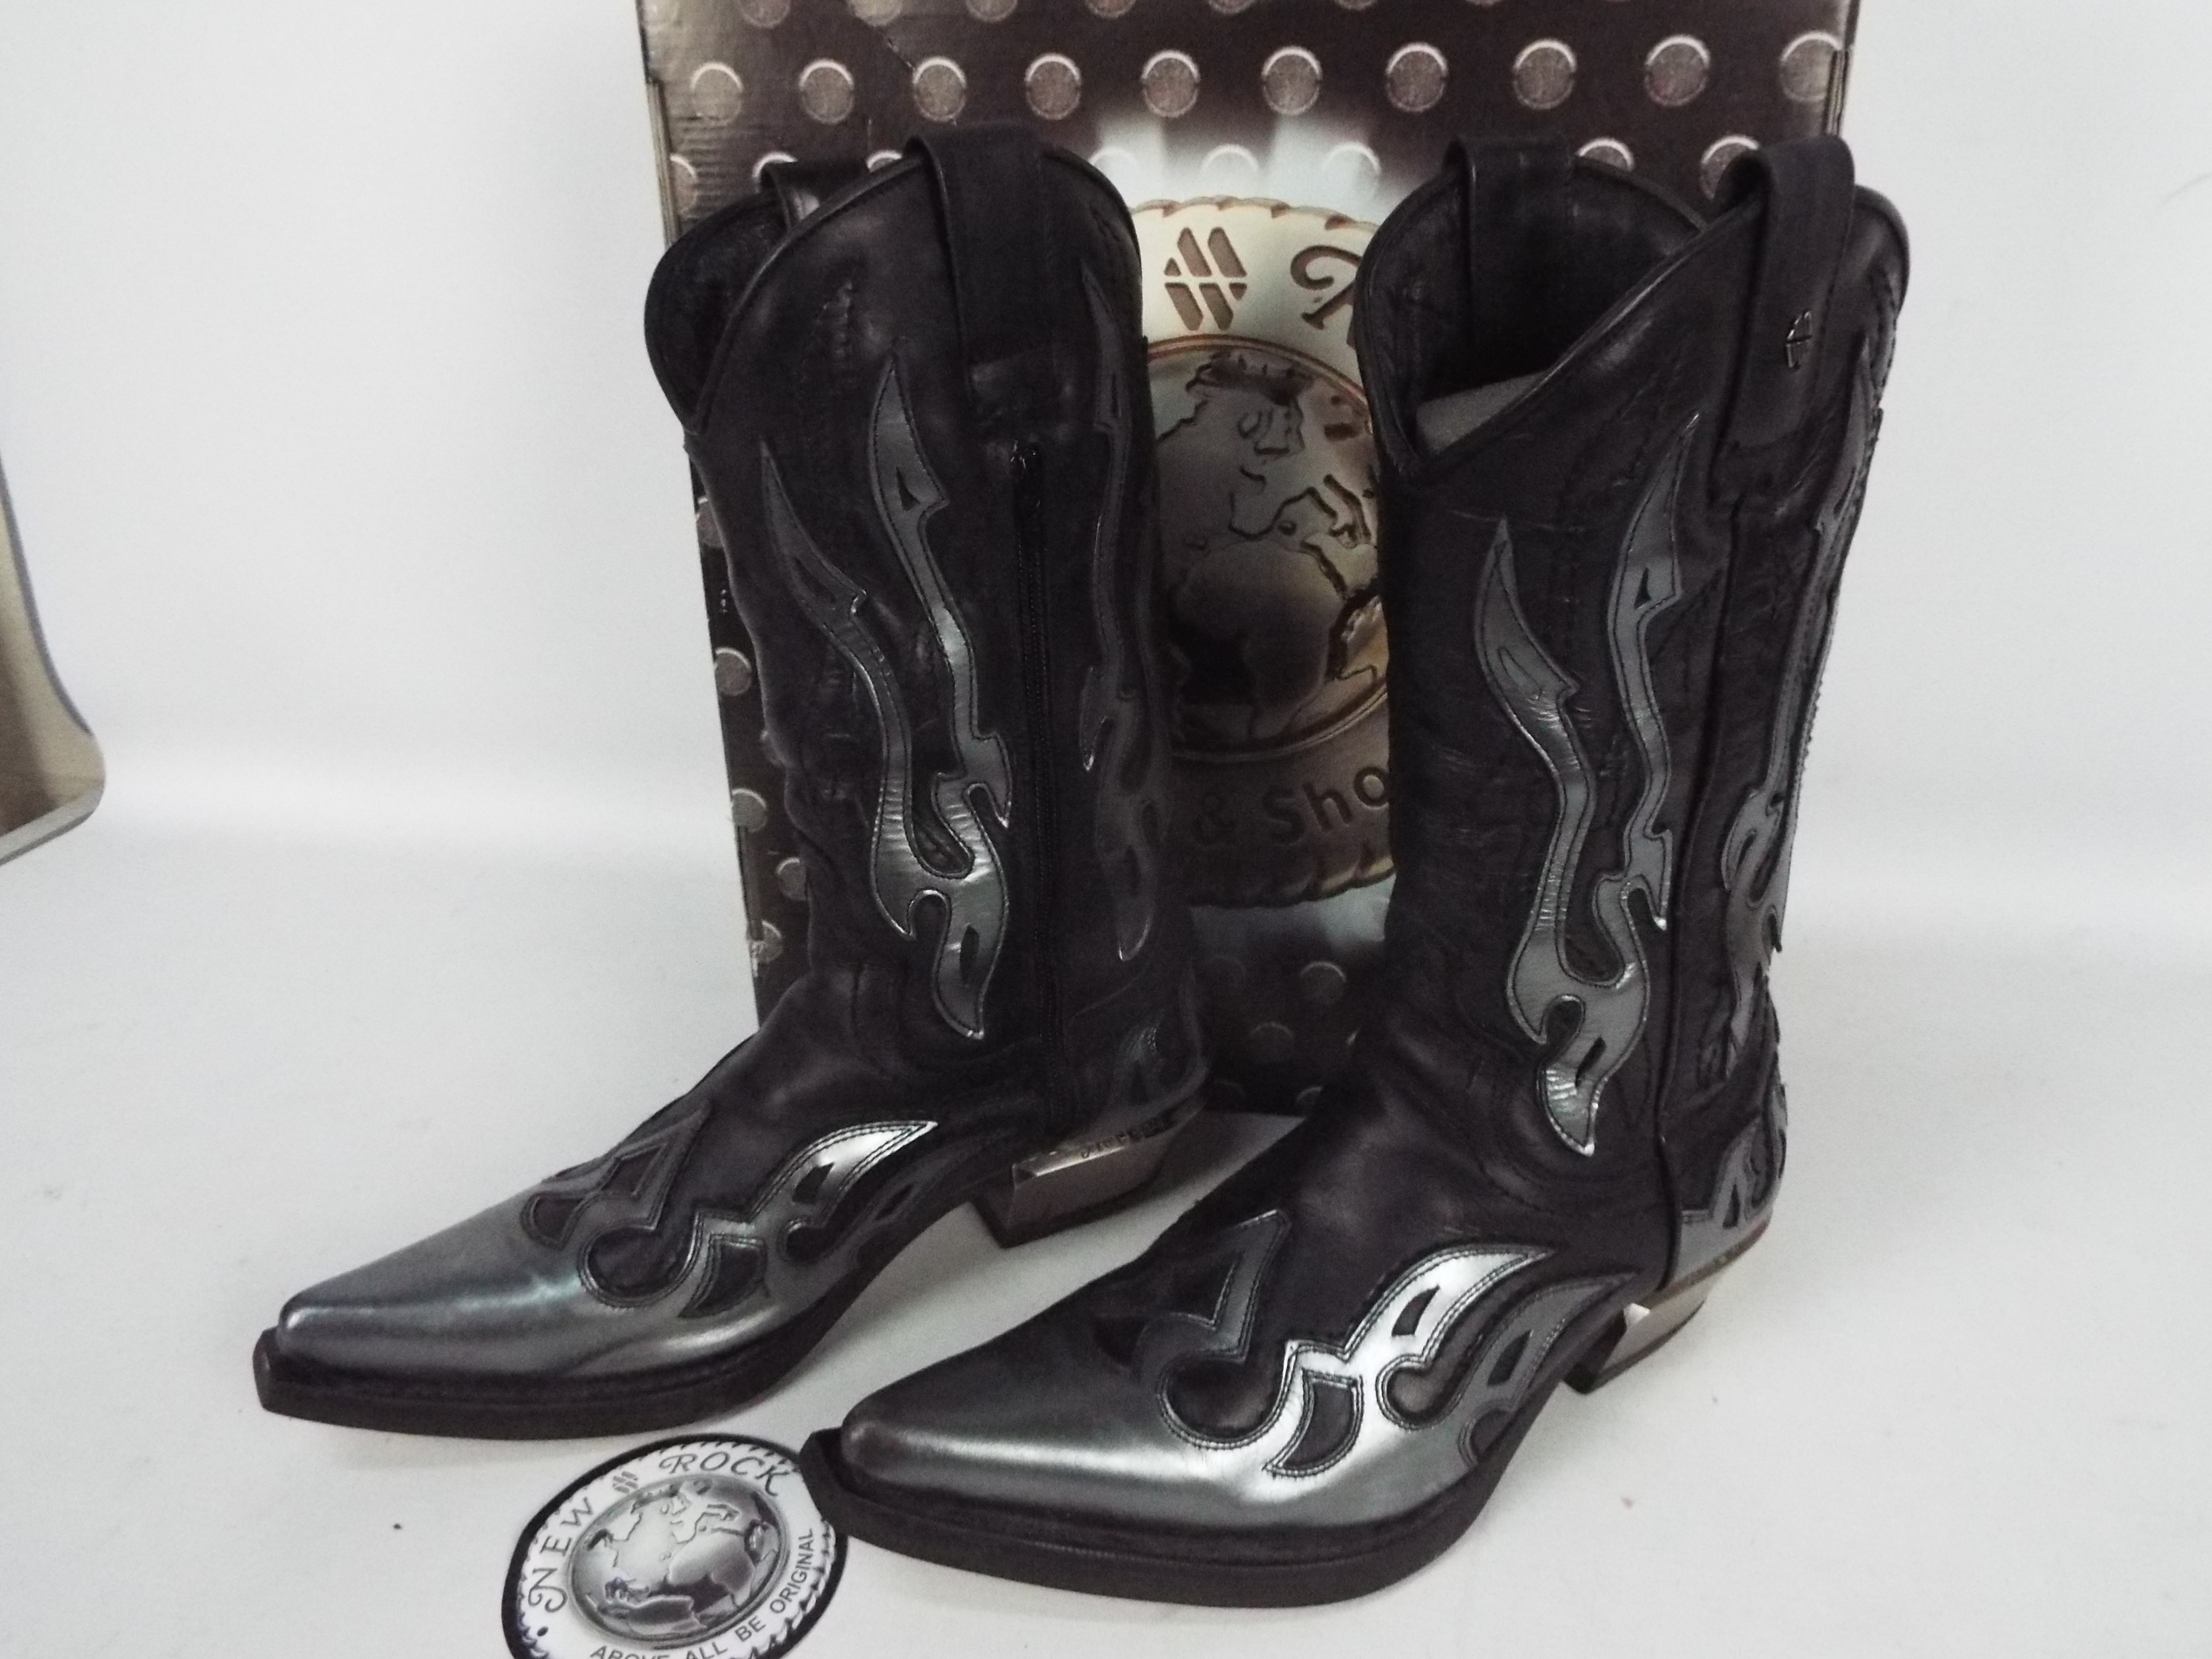 New Rock cowboy boots - a pair of black leather boots with silvered flame decoration, # M. - Image 2 of 3